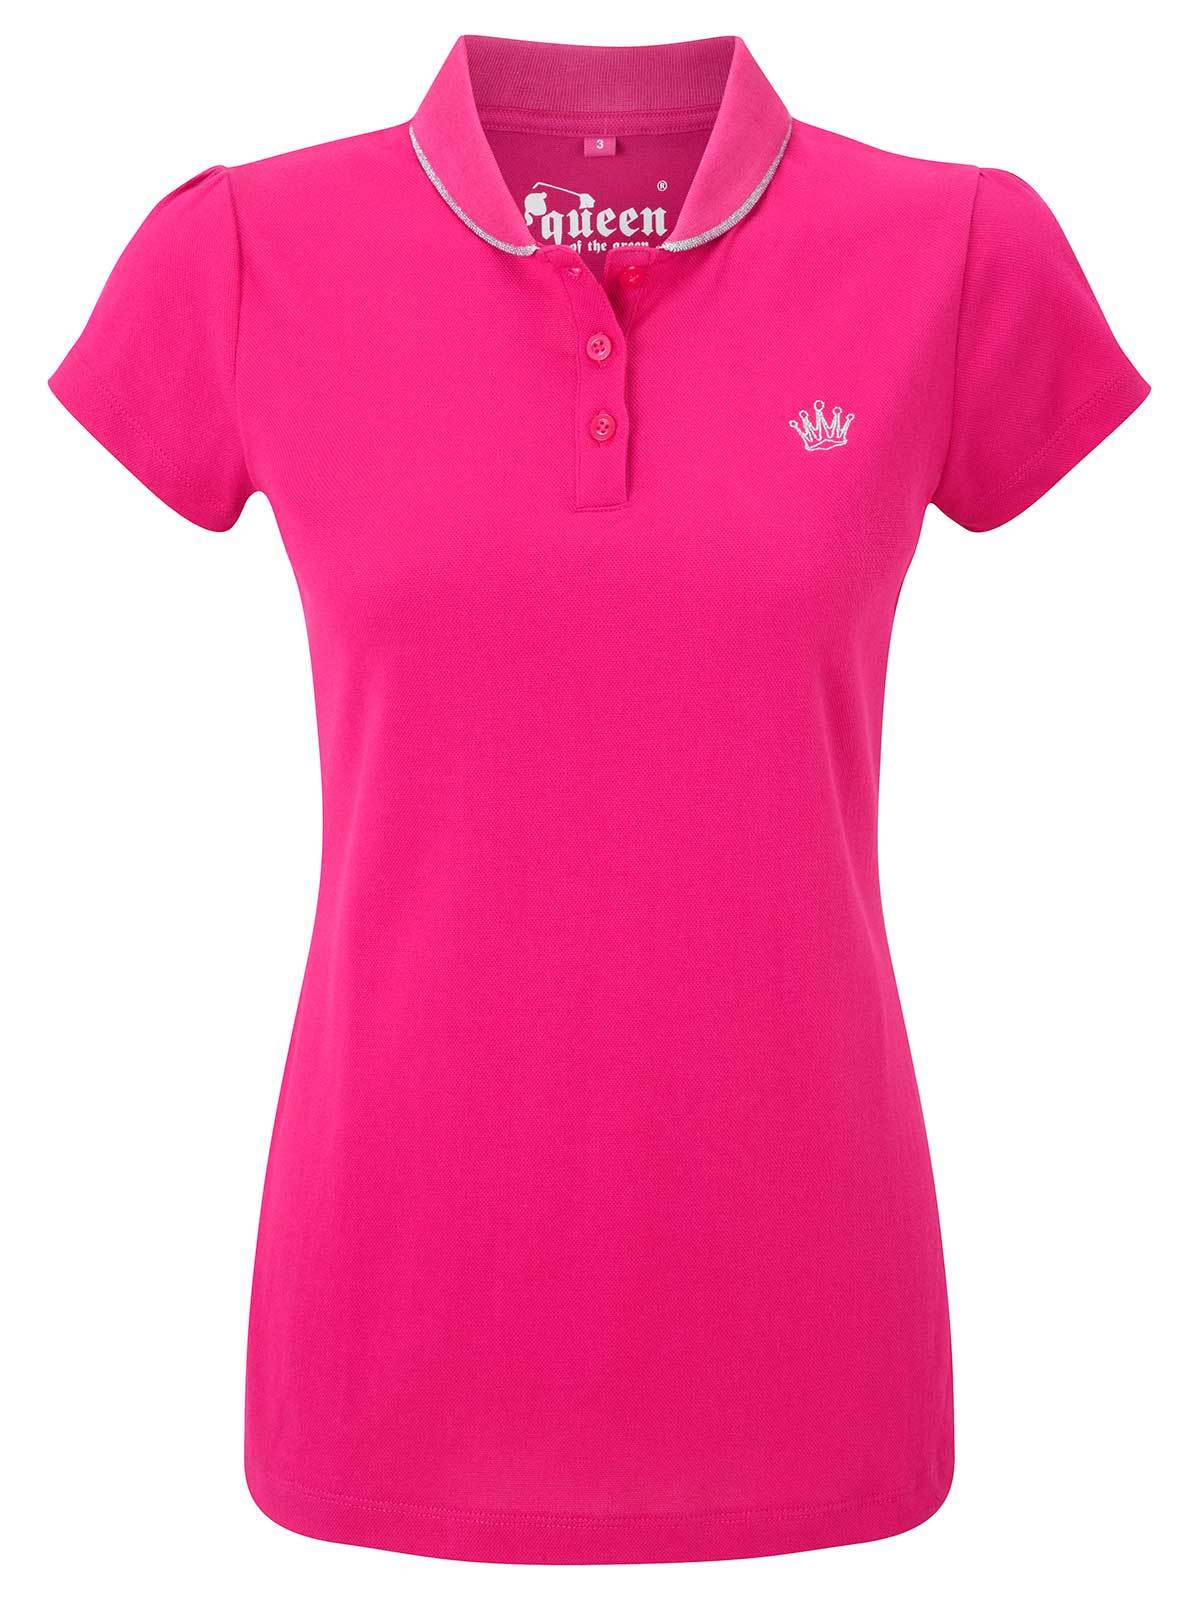 Bunker Mentality Pink Ladies Golf Polo Shirt with small silver embroidered Crown on Chest - Front